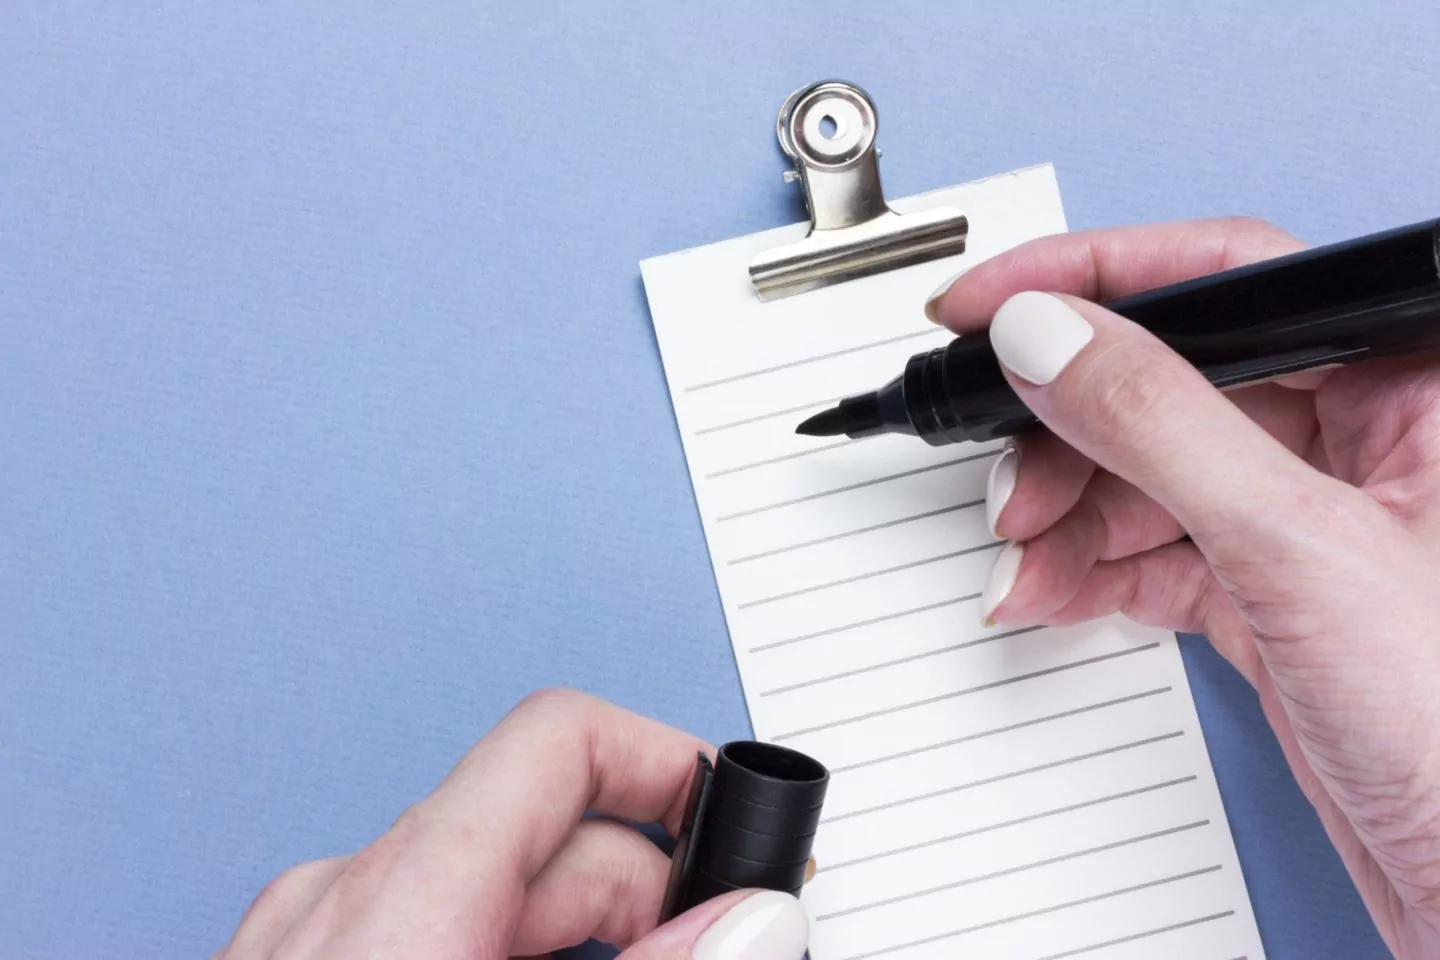 Important business checklist, planning for shopping reminder or project priority task list on blue background with copy space. Marker in female hands